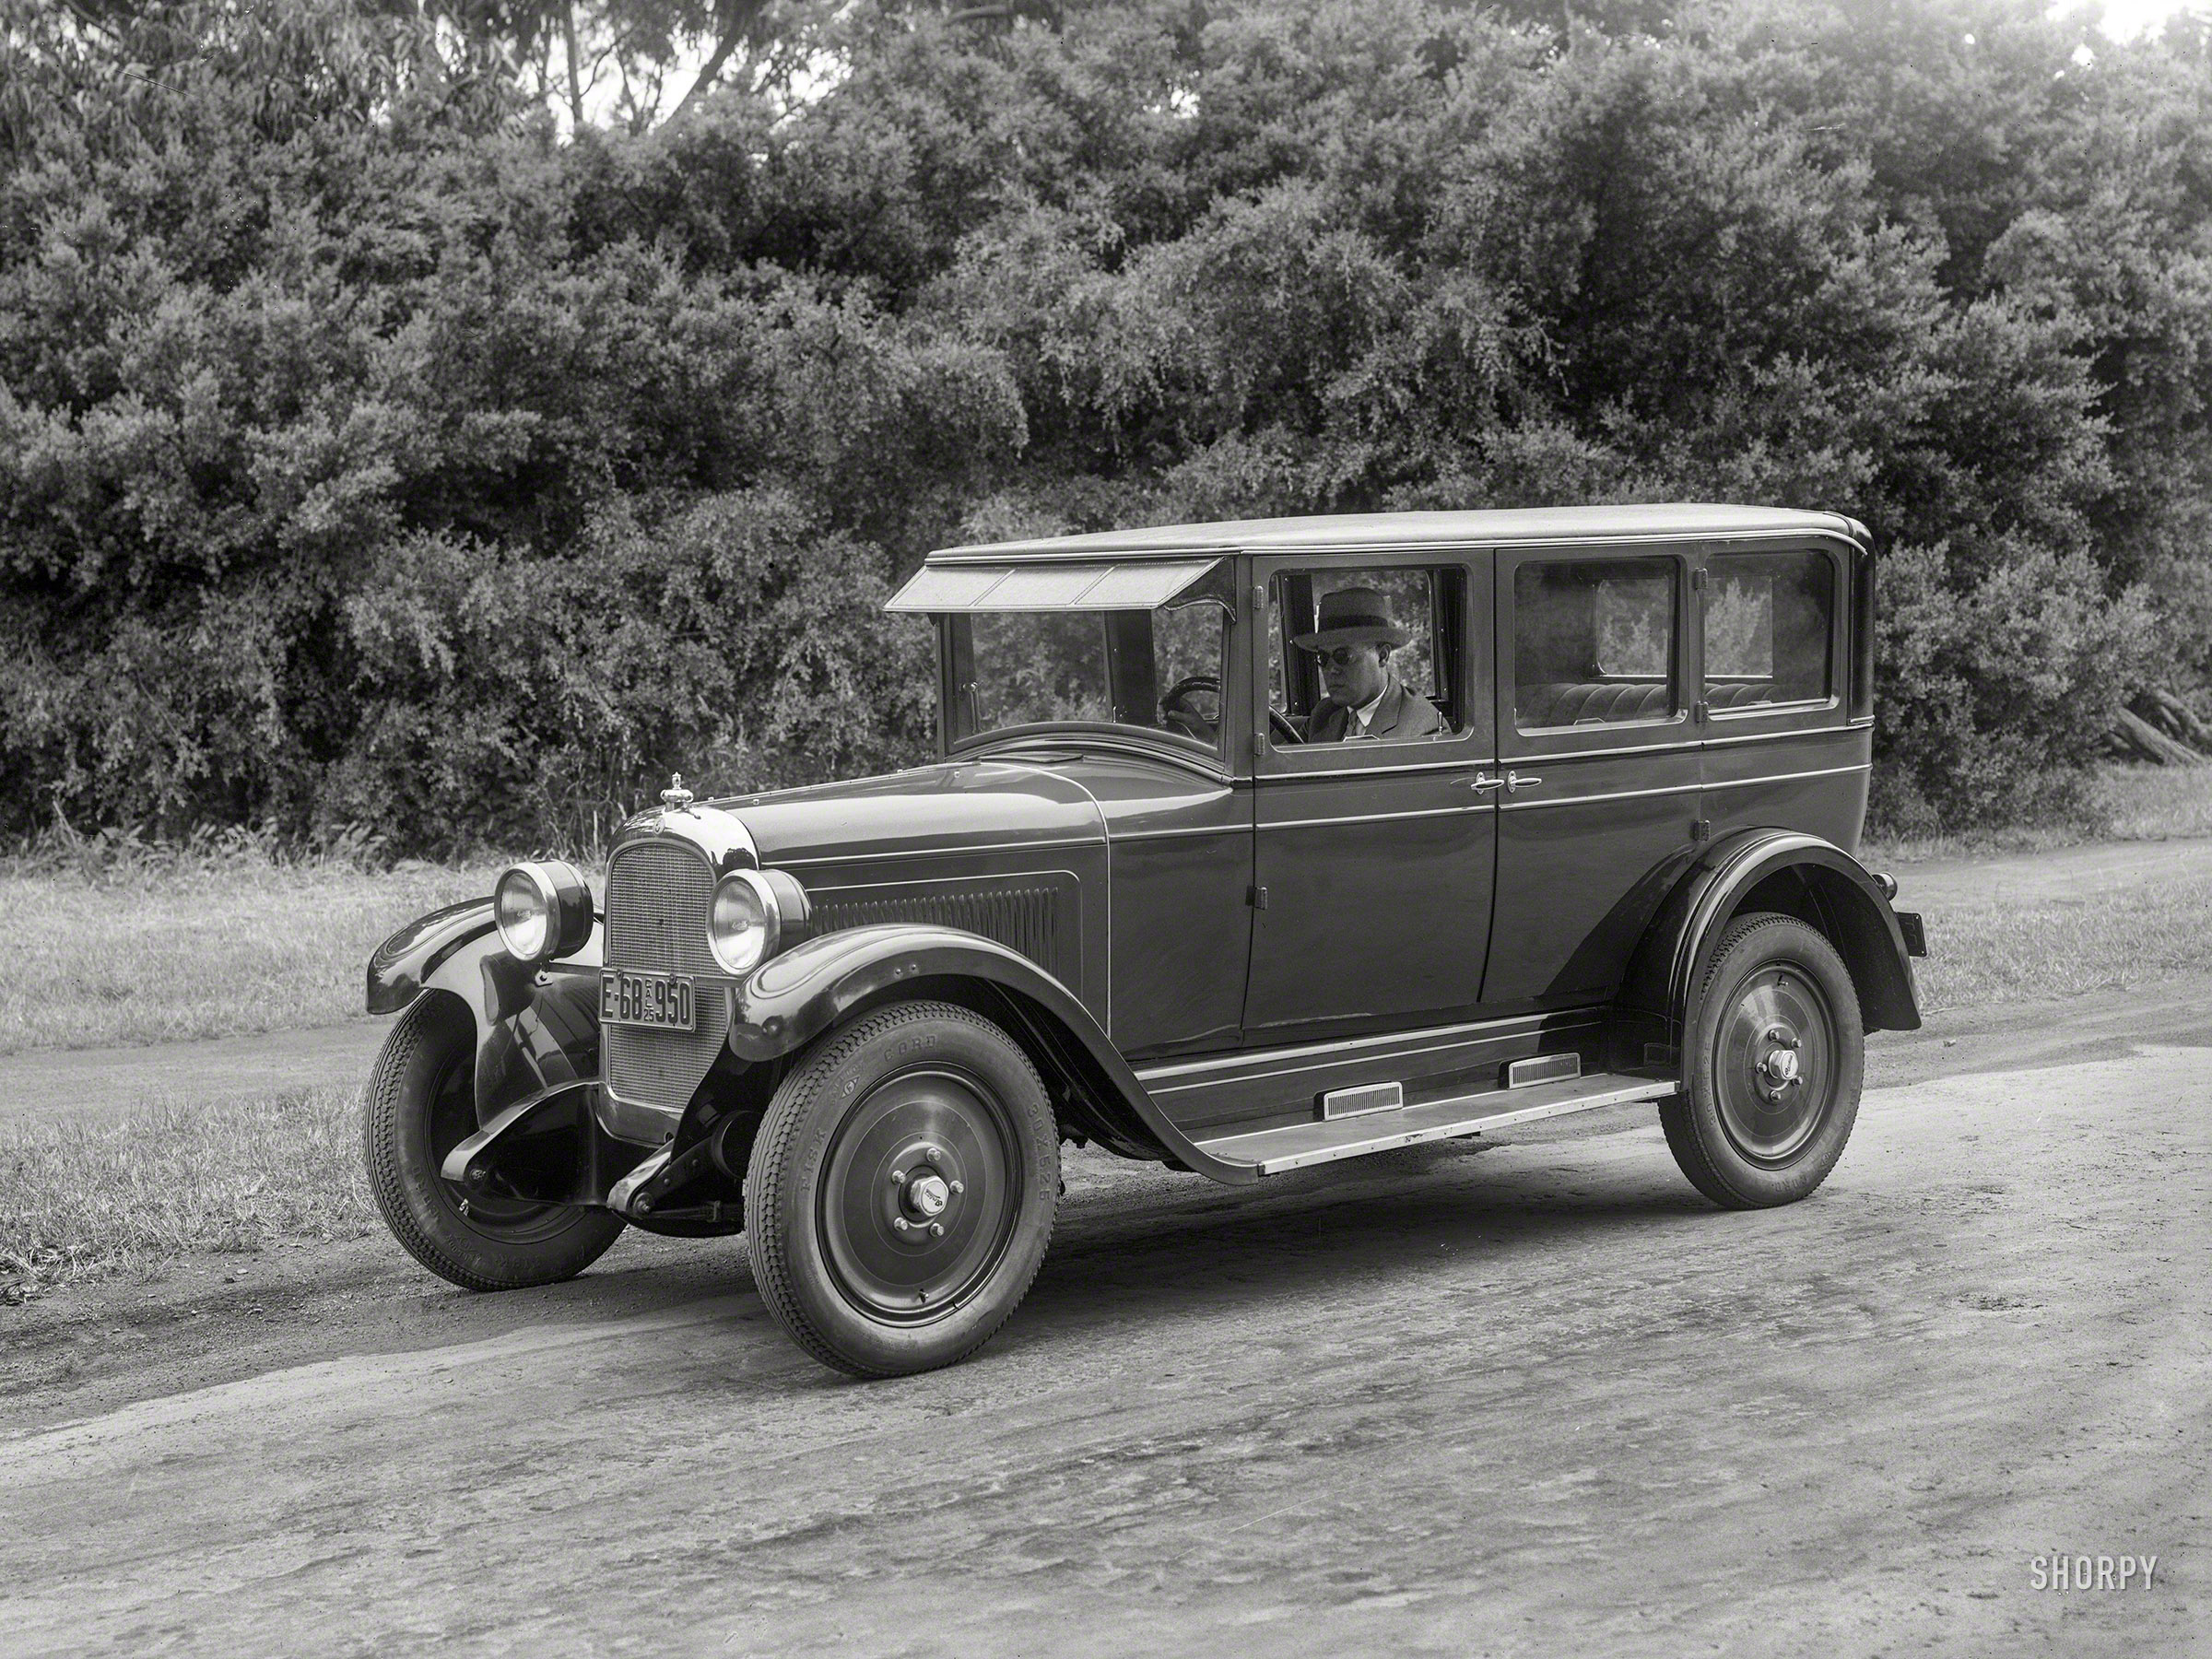 San Francisco, 1925. "Overland Six sedan." Latest entry on the Shorpy Shortlist of Incognito Conveyances. 5x7 glass negative by Christopher Helin. View full size.